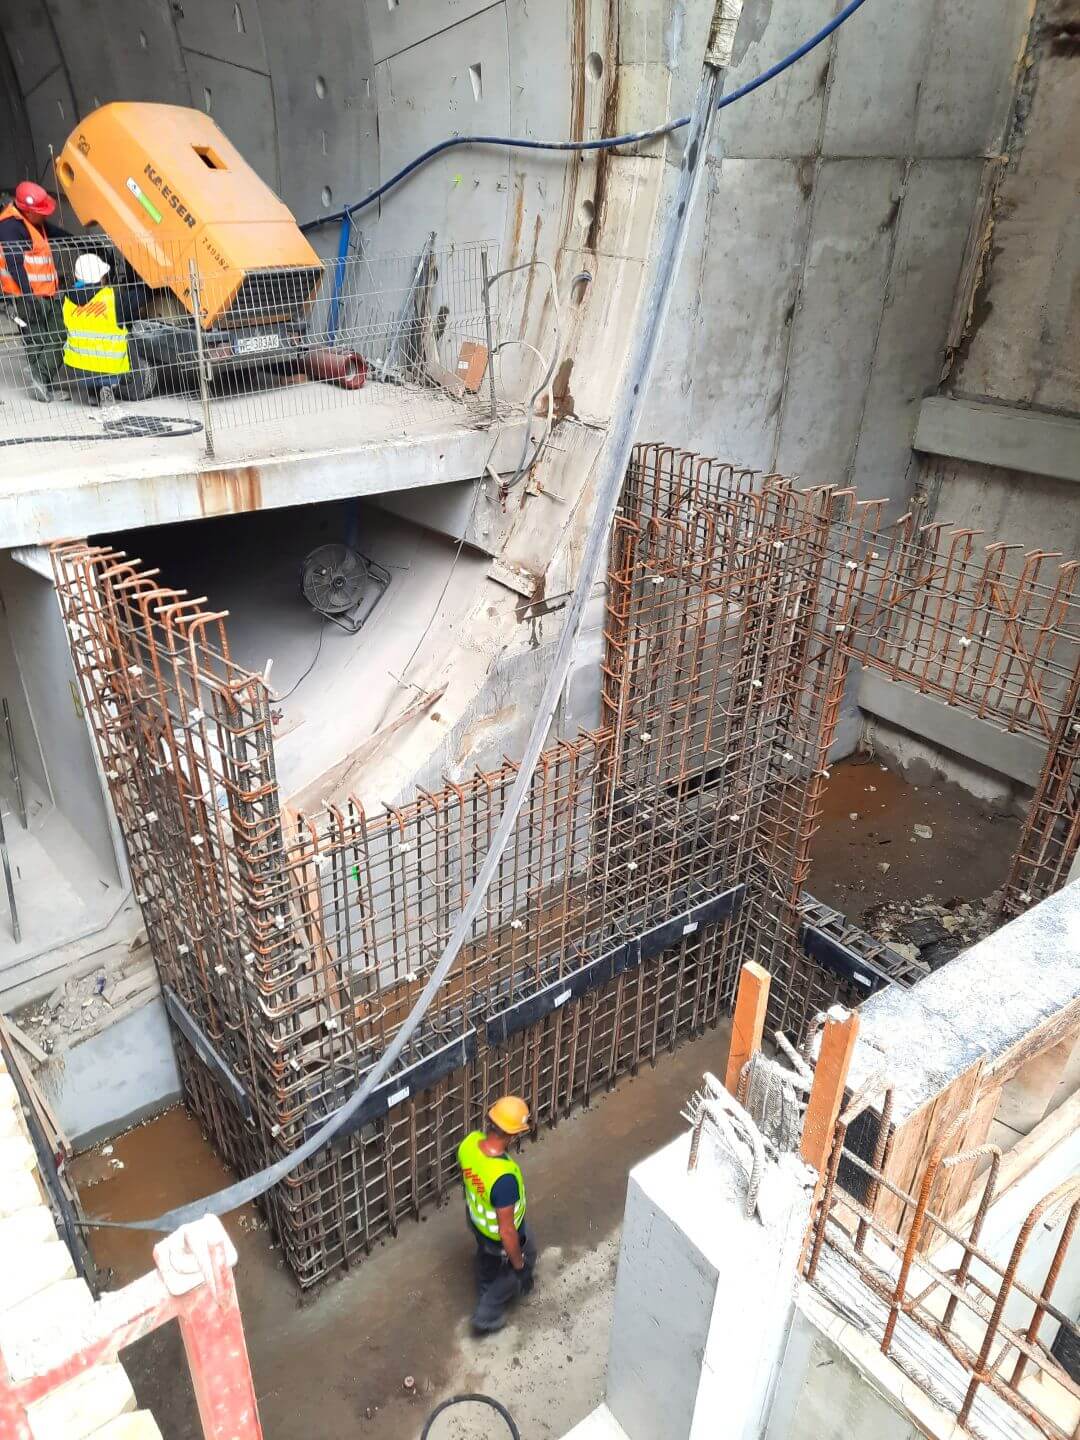 Progress of Works on the Construction of the Tunnel Under Swina